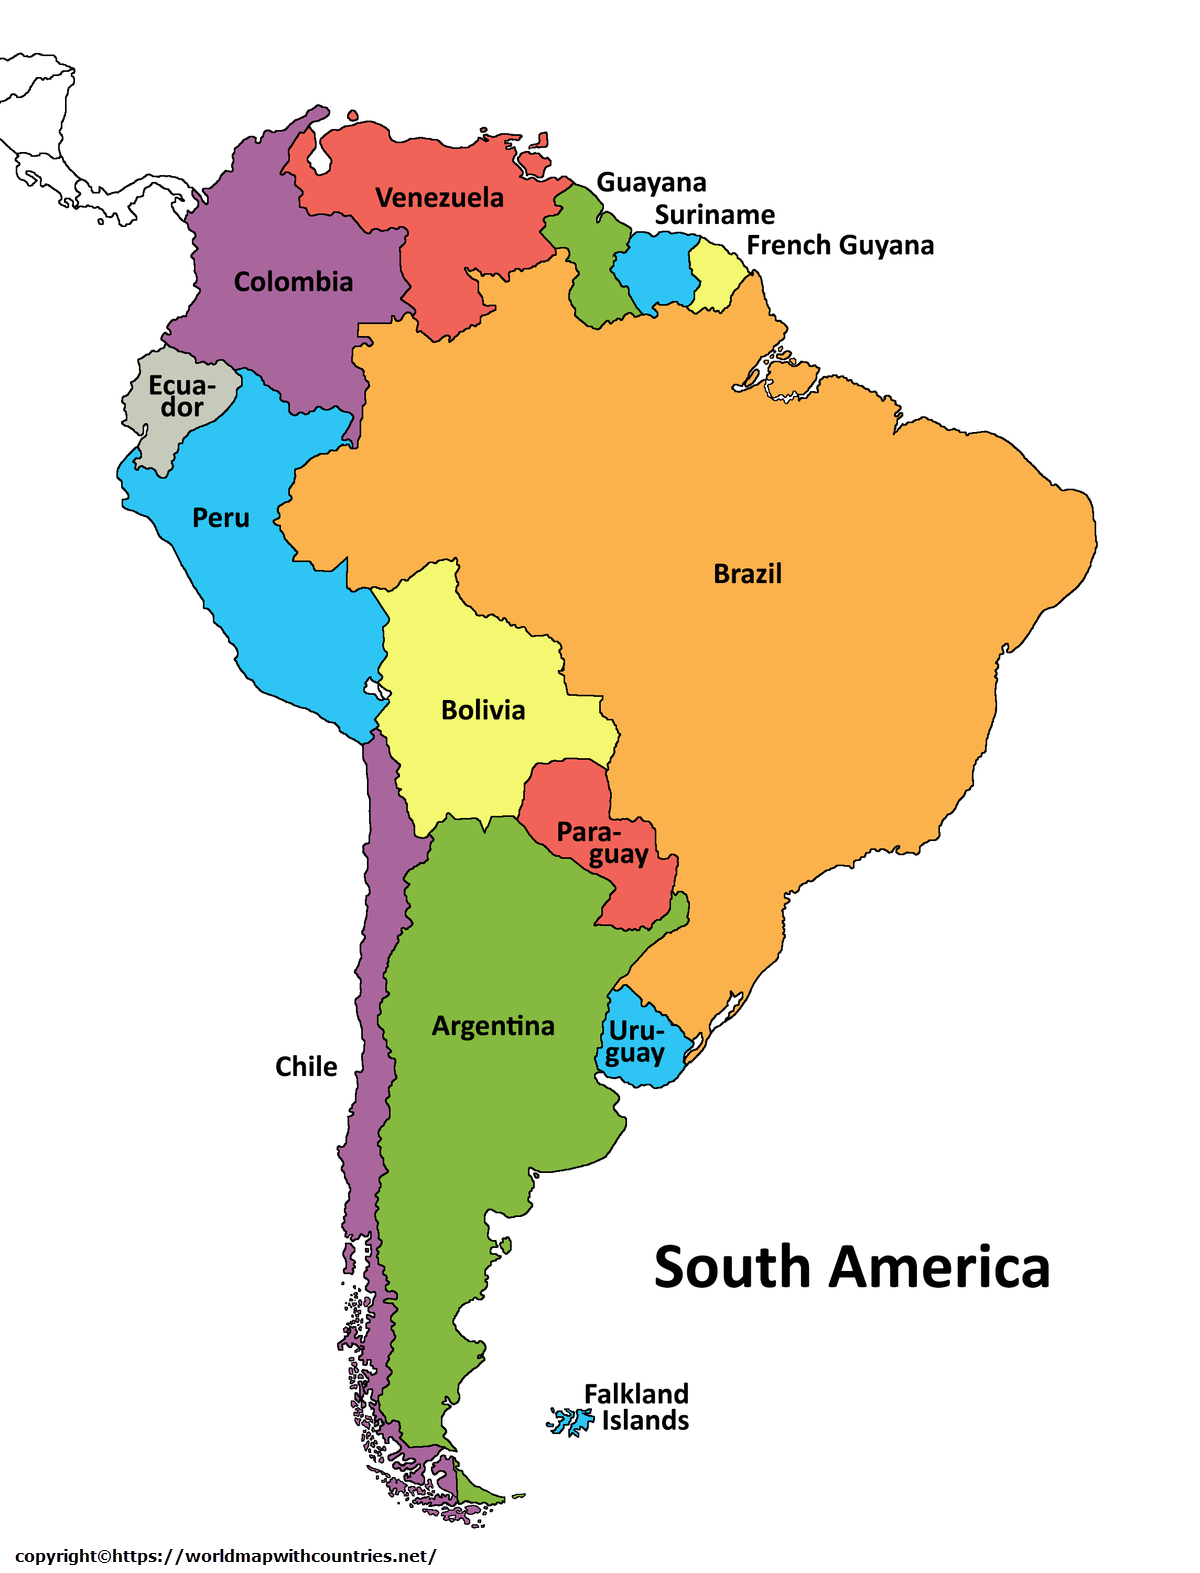 4 Free Political Map of South America with Countries in PDF | World Map map of south america and central america